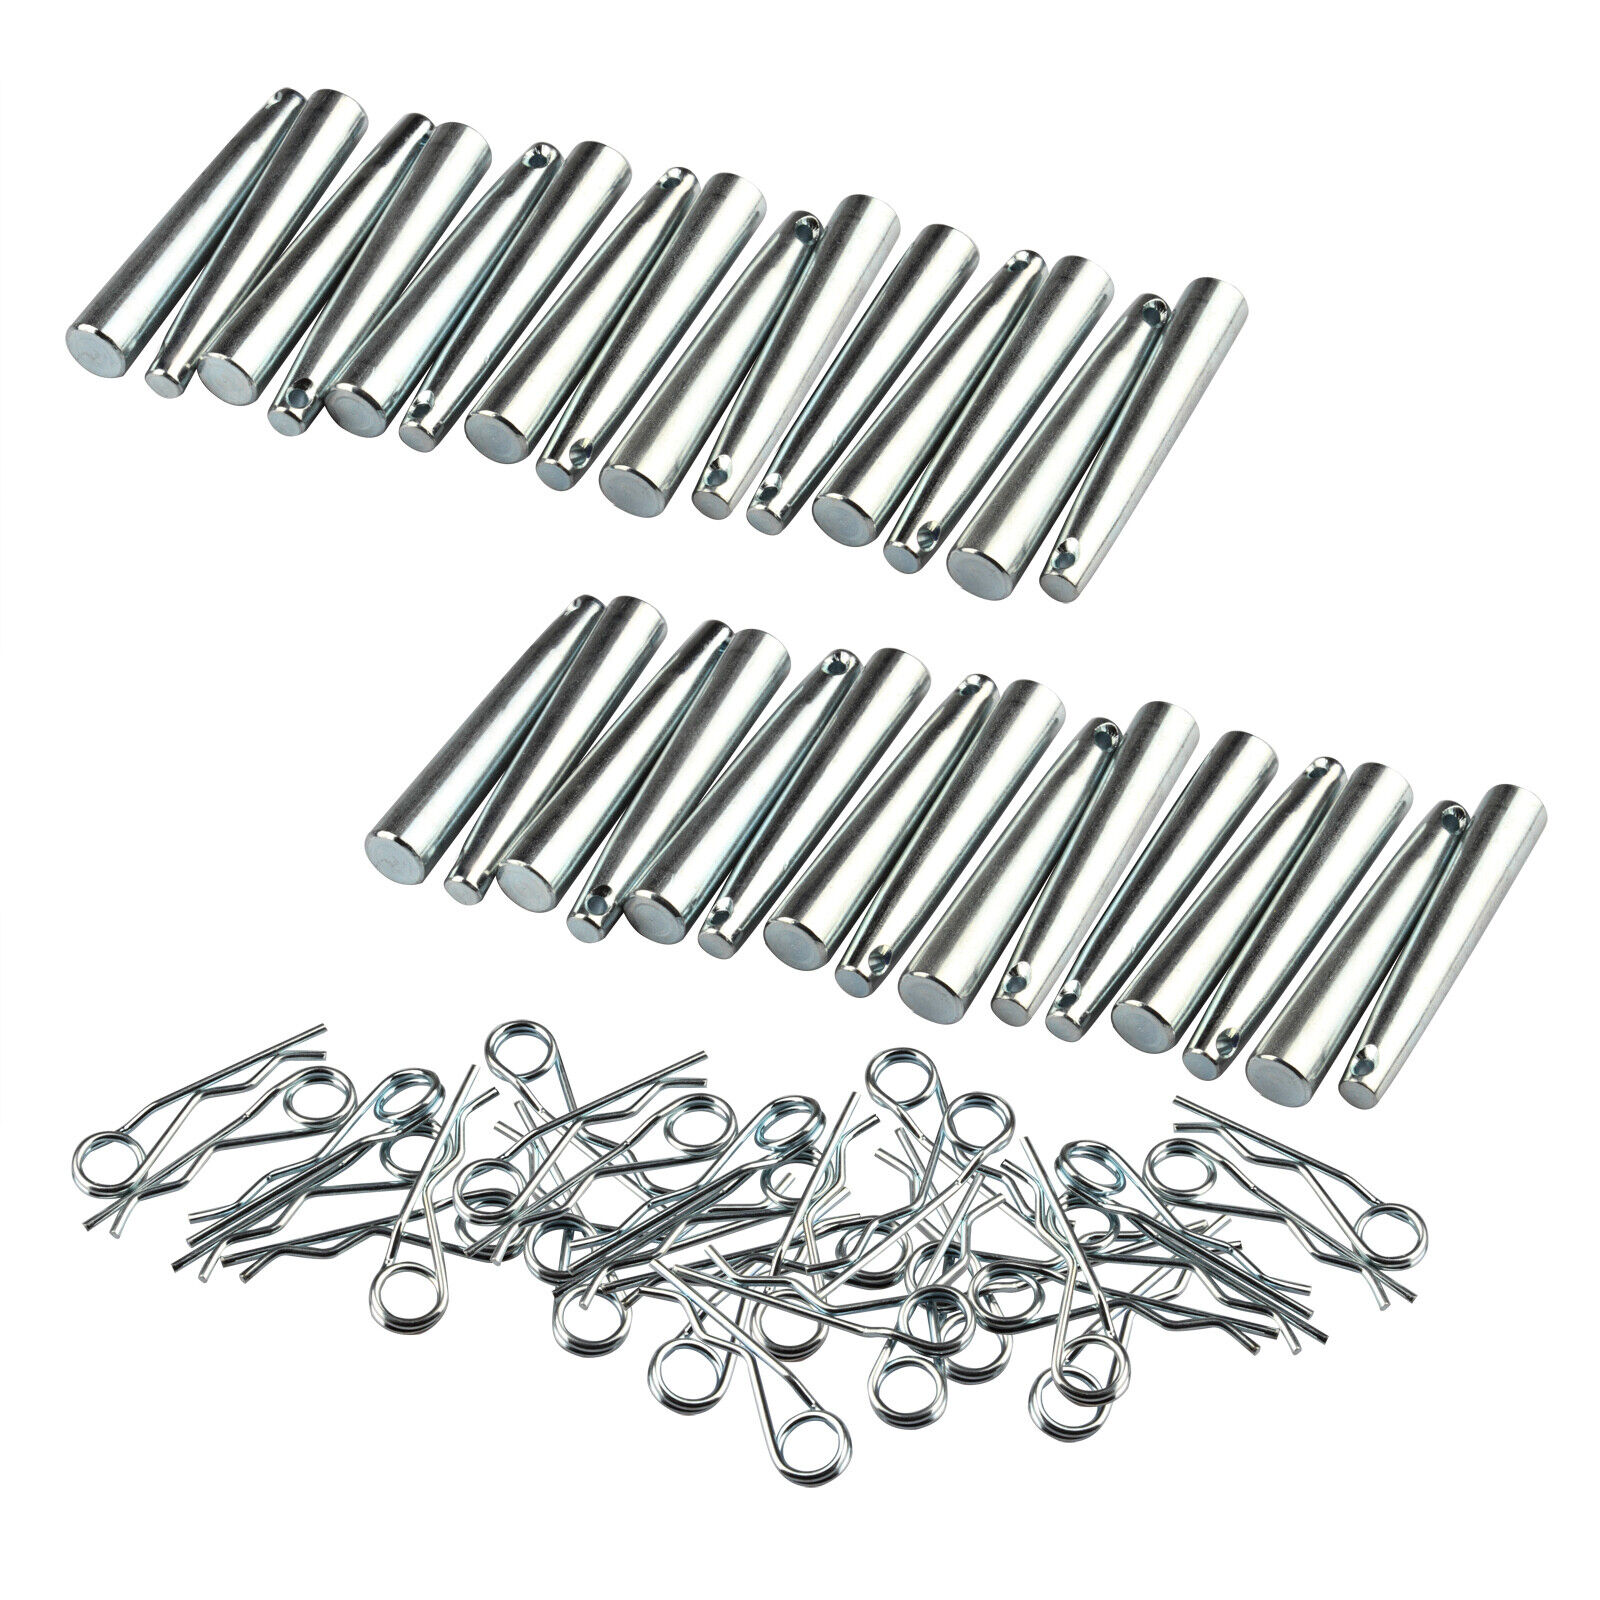 30Pcs Aluminum Conical Coupler Pins with R-Clip Truss Accessories 2.7 inch Pin Unbranded Does not apply